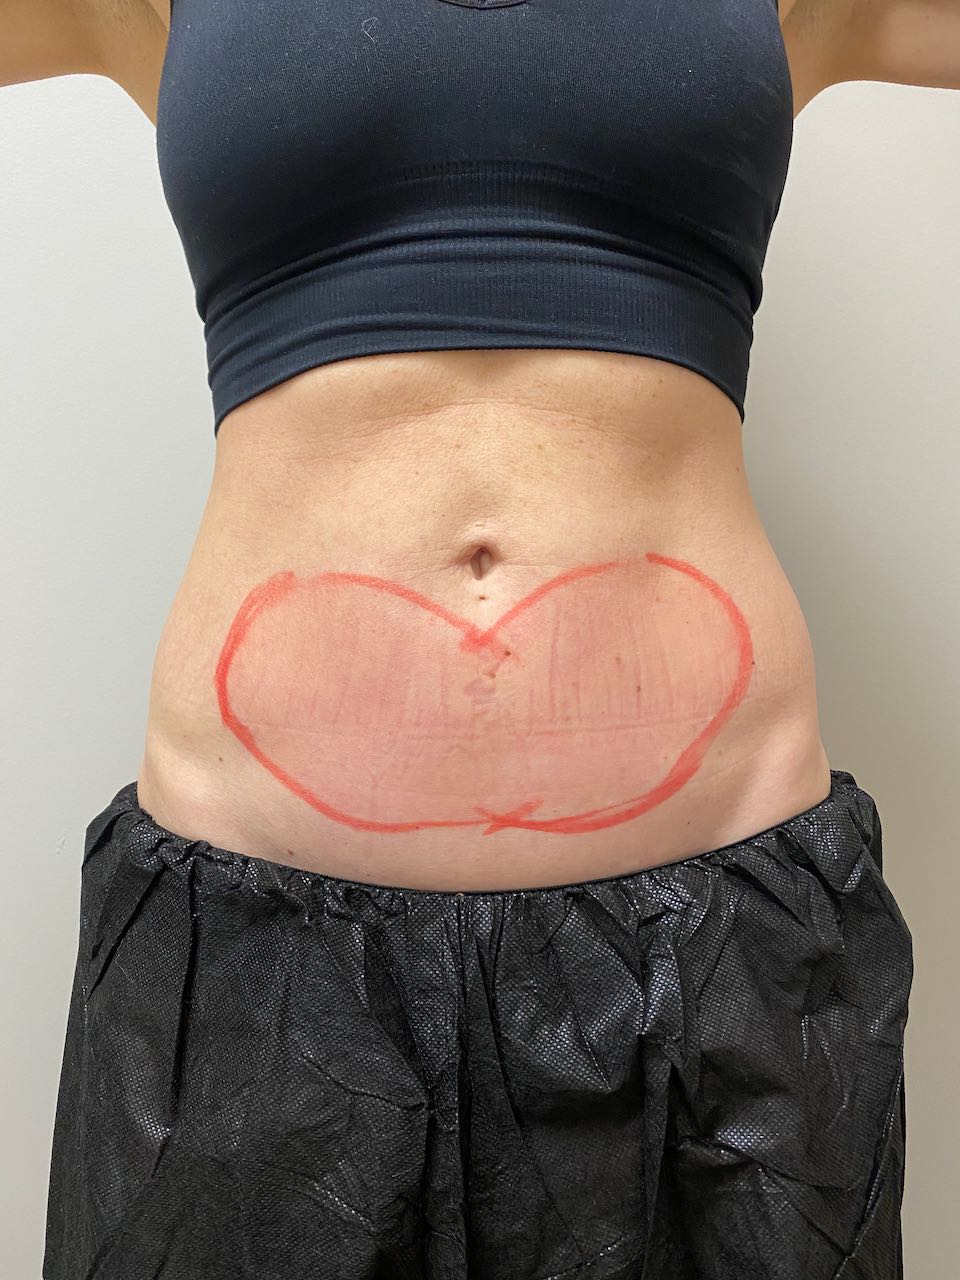 Does Fat Come Back After CoolSculpting?